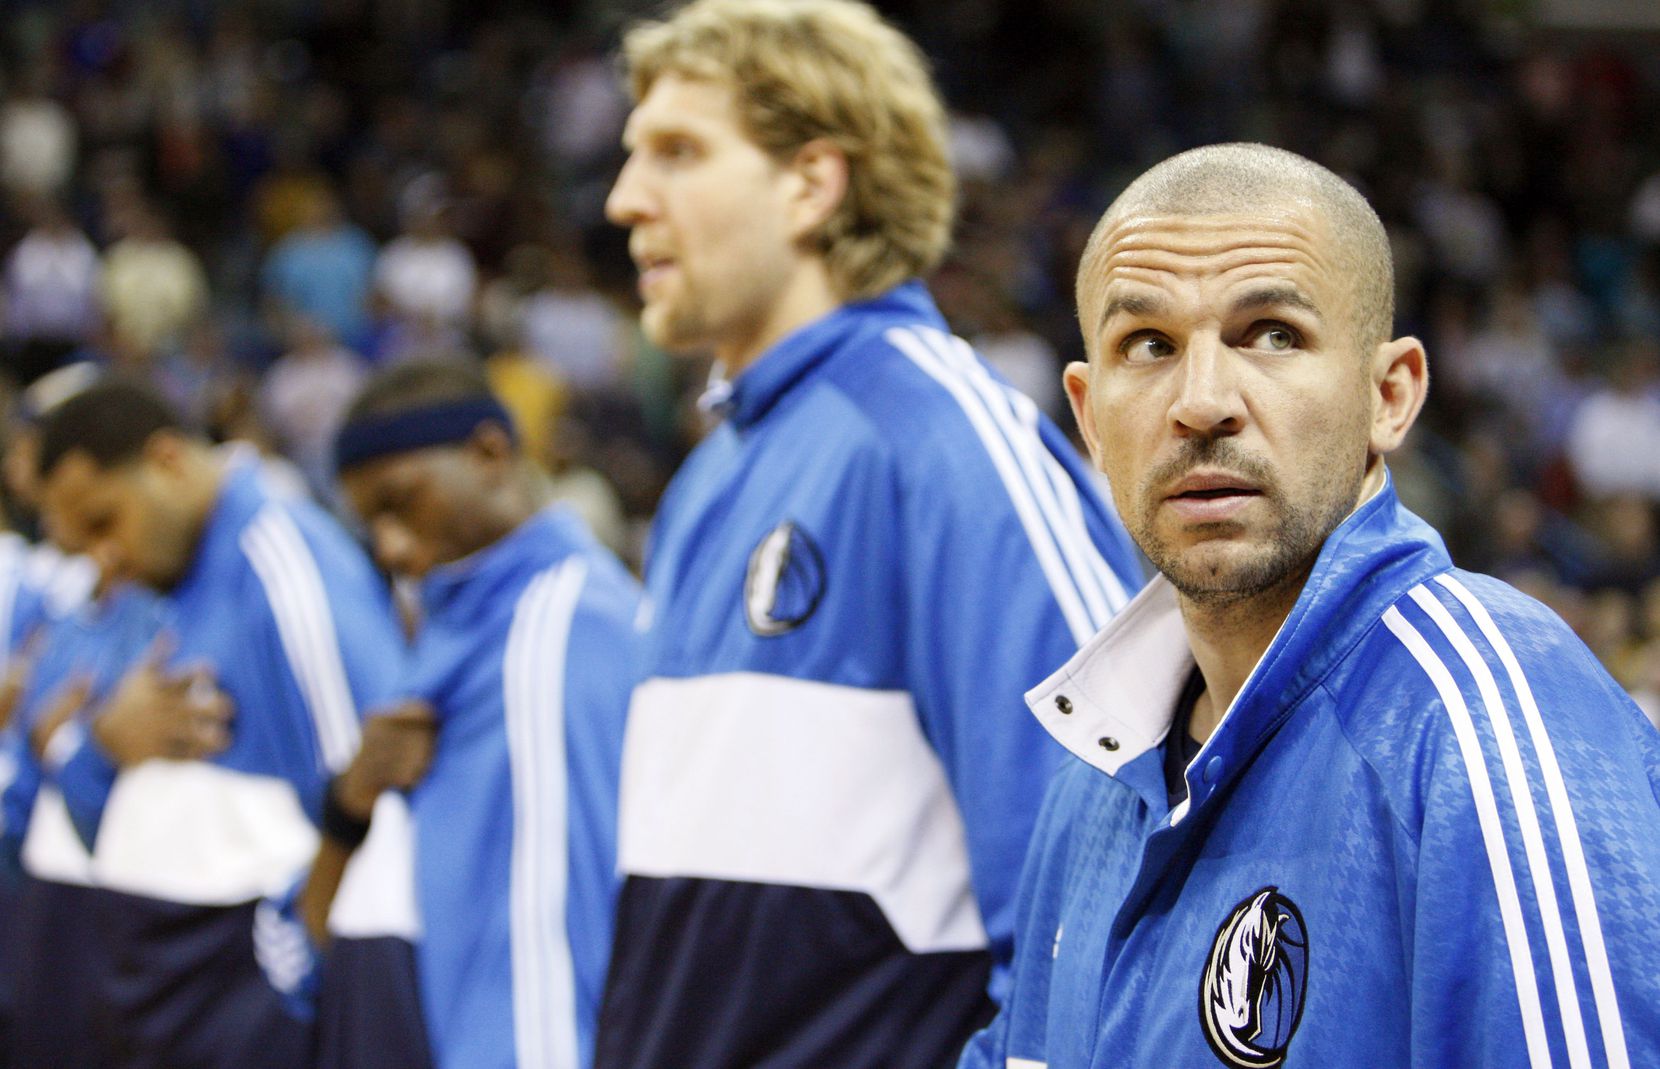 Dallas Mavericks' Jason Kidd, right, looks around before their NBA basketball game with the New Orleans Hornets in New Orleans, Wednesday, Feb. 20, 2008.